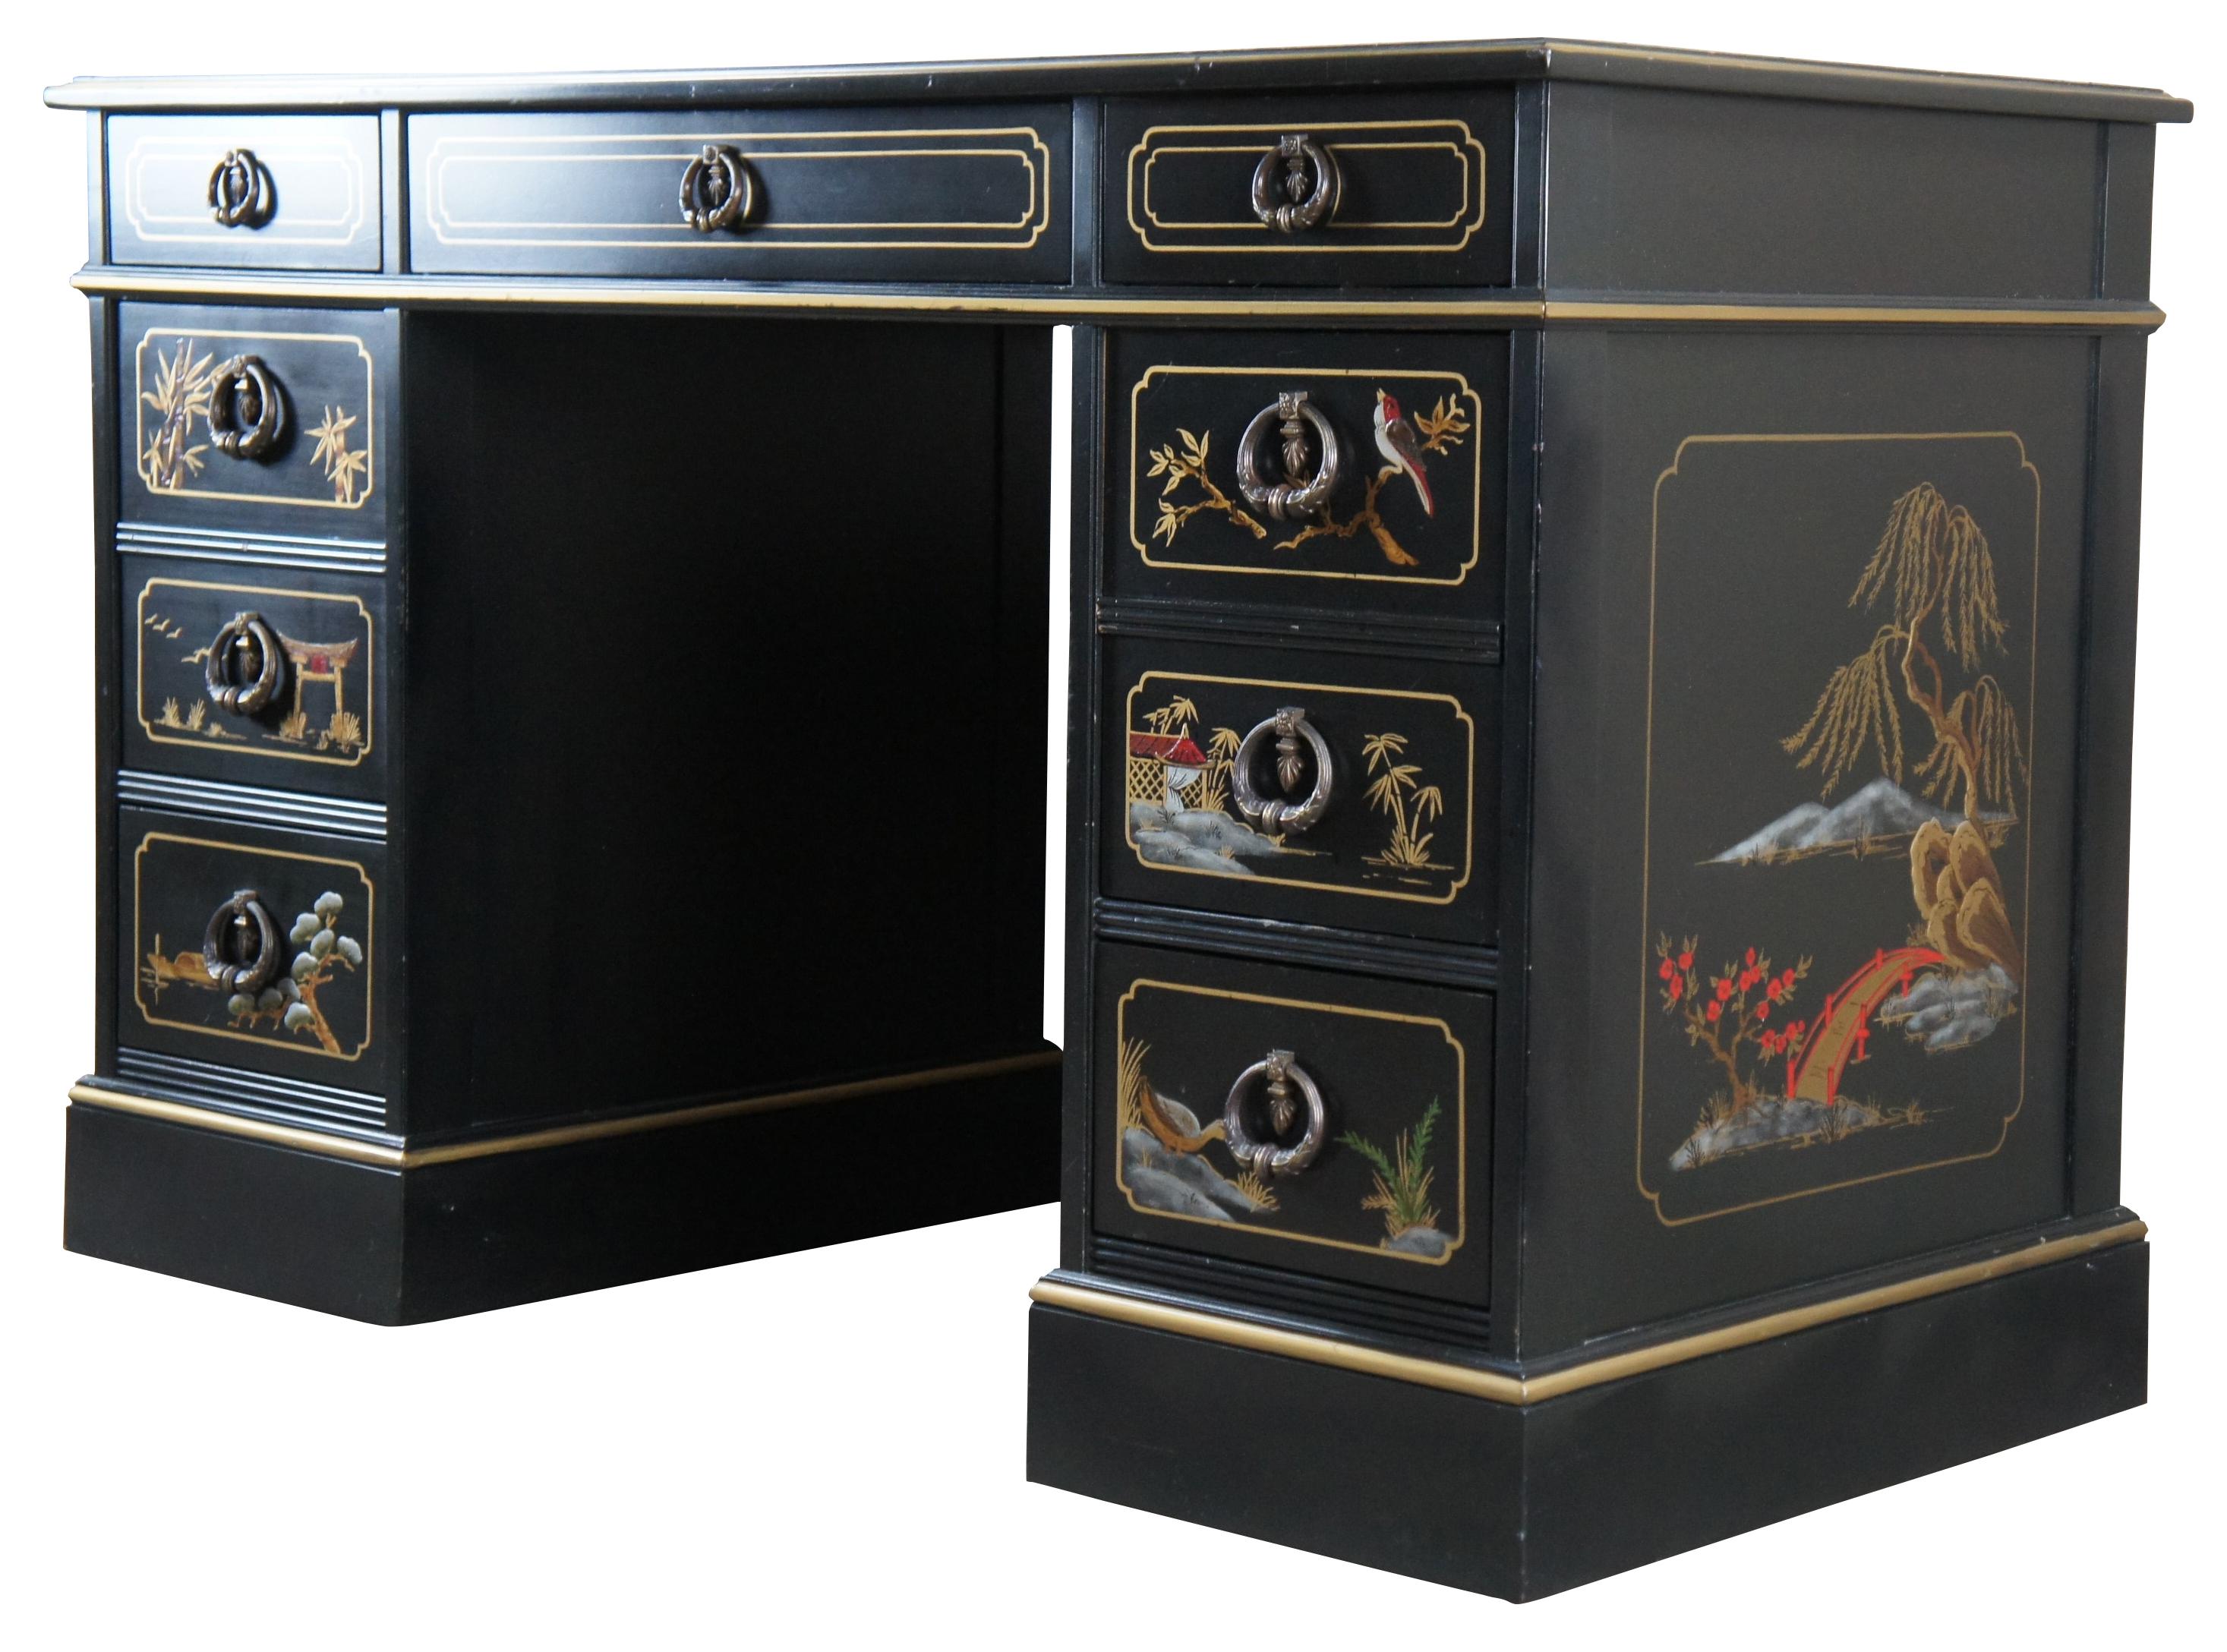 Vintage Sligh Furniture black lacquered knee hole writing desk featuring Chinoiserie styling with seven drawers, a tooled red leather top, and floral landscape motif that features birds, bridges, boats, pagodas and bamboo.

Measures: 46